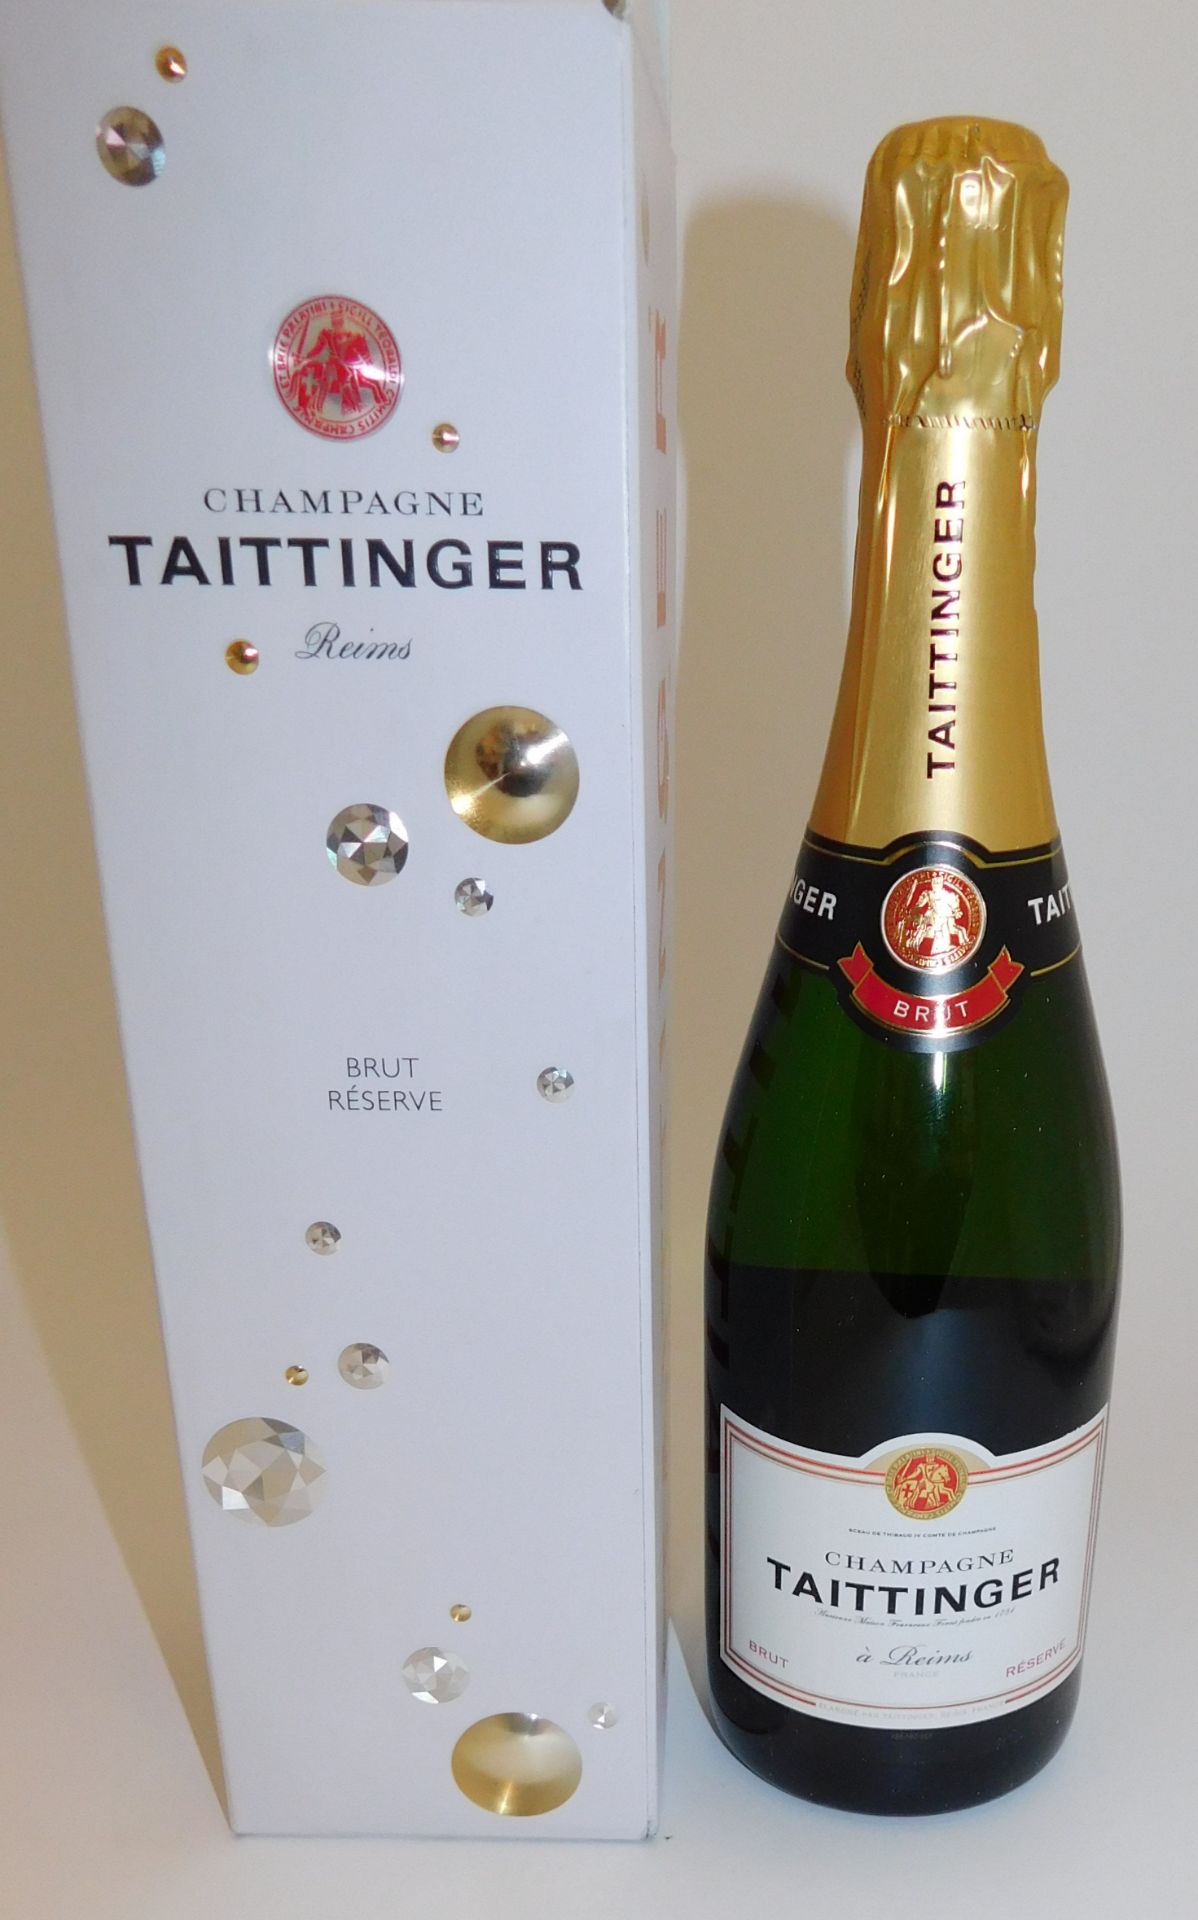 6 Bottles of Tattinger Brut Reserve Champagne, 750ml, Individually Boxed (Located Stockport – See